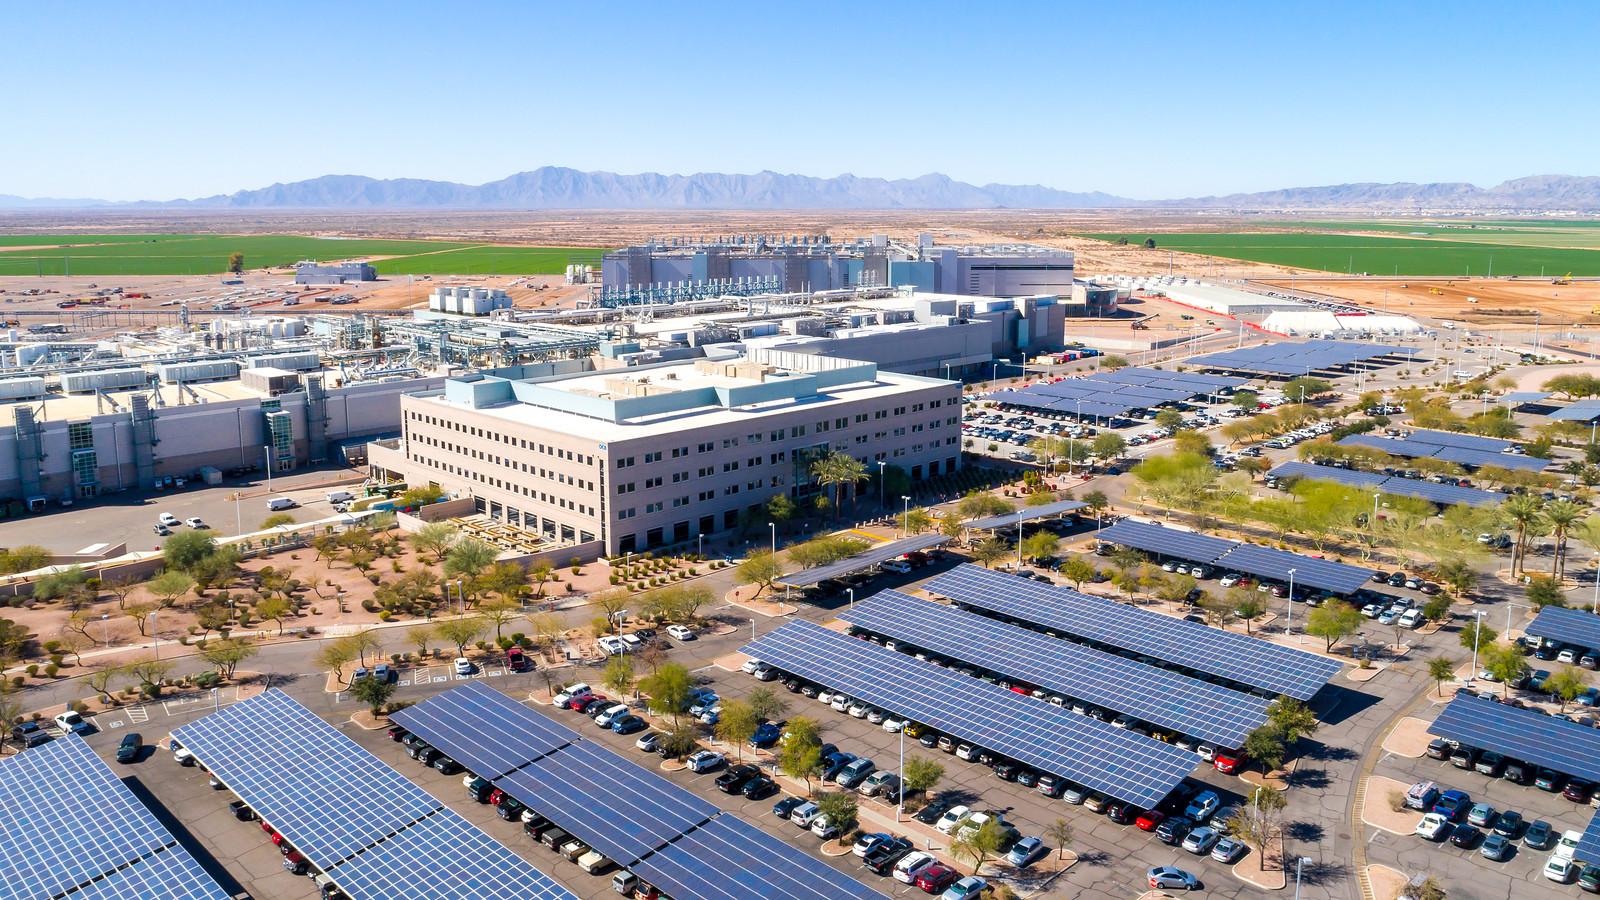 As Intel expands in Chandler, what’s making Arizona ‘semiconductor